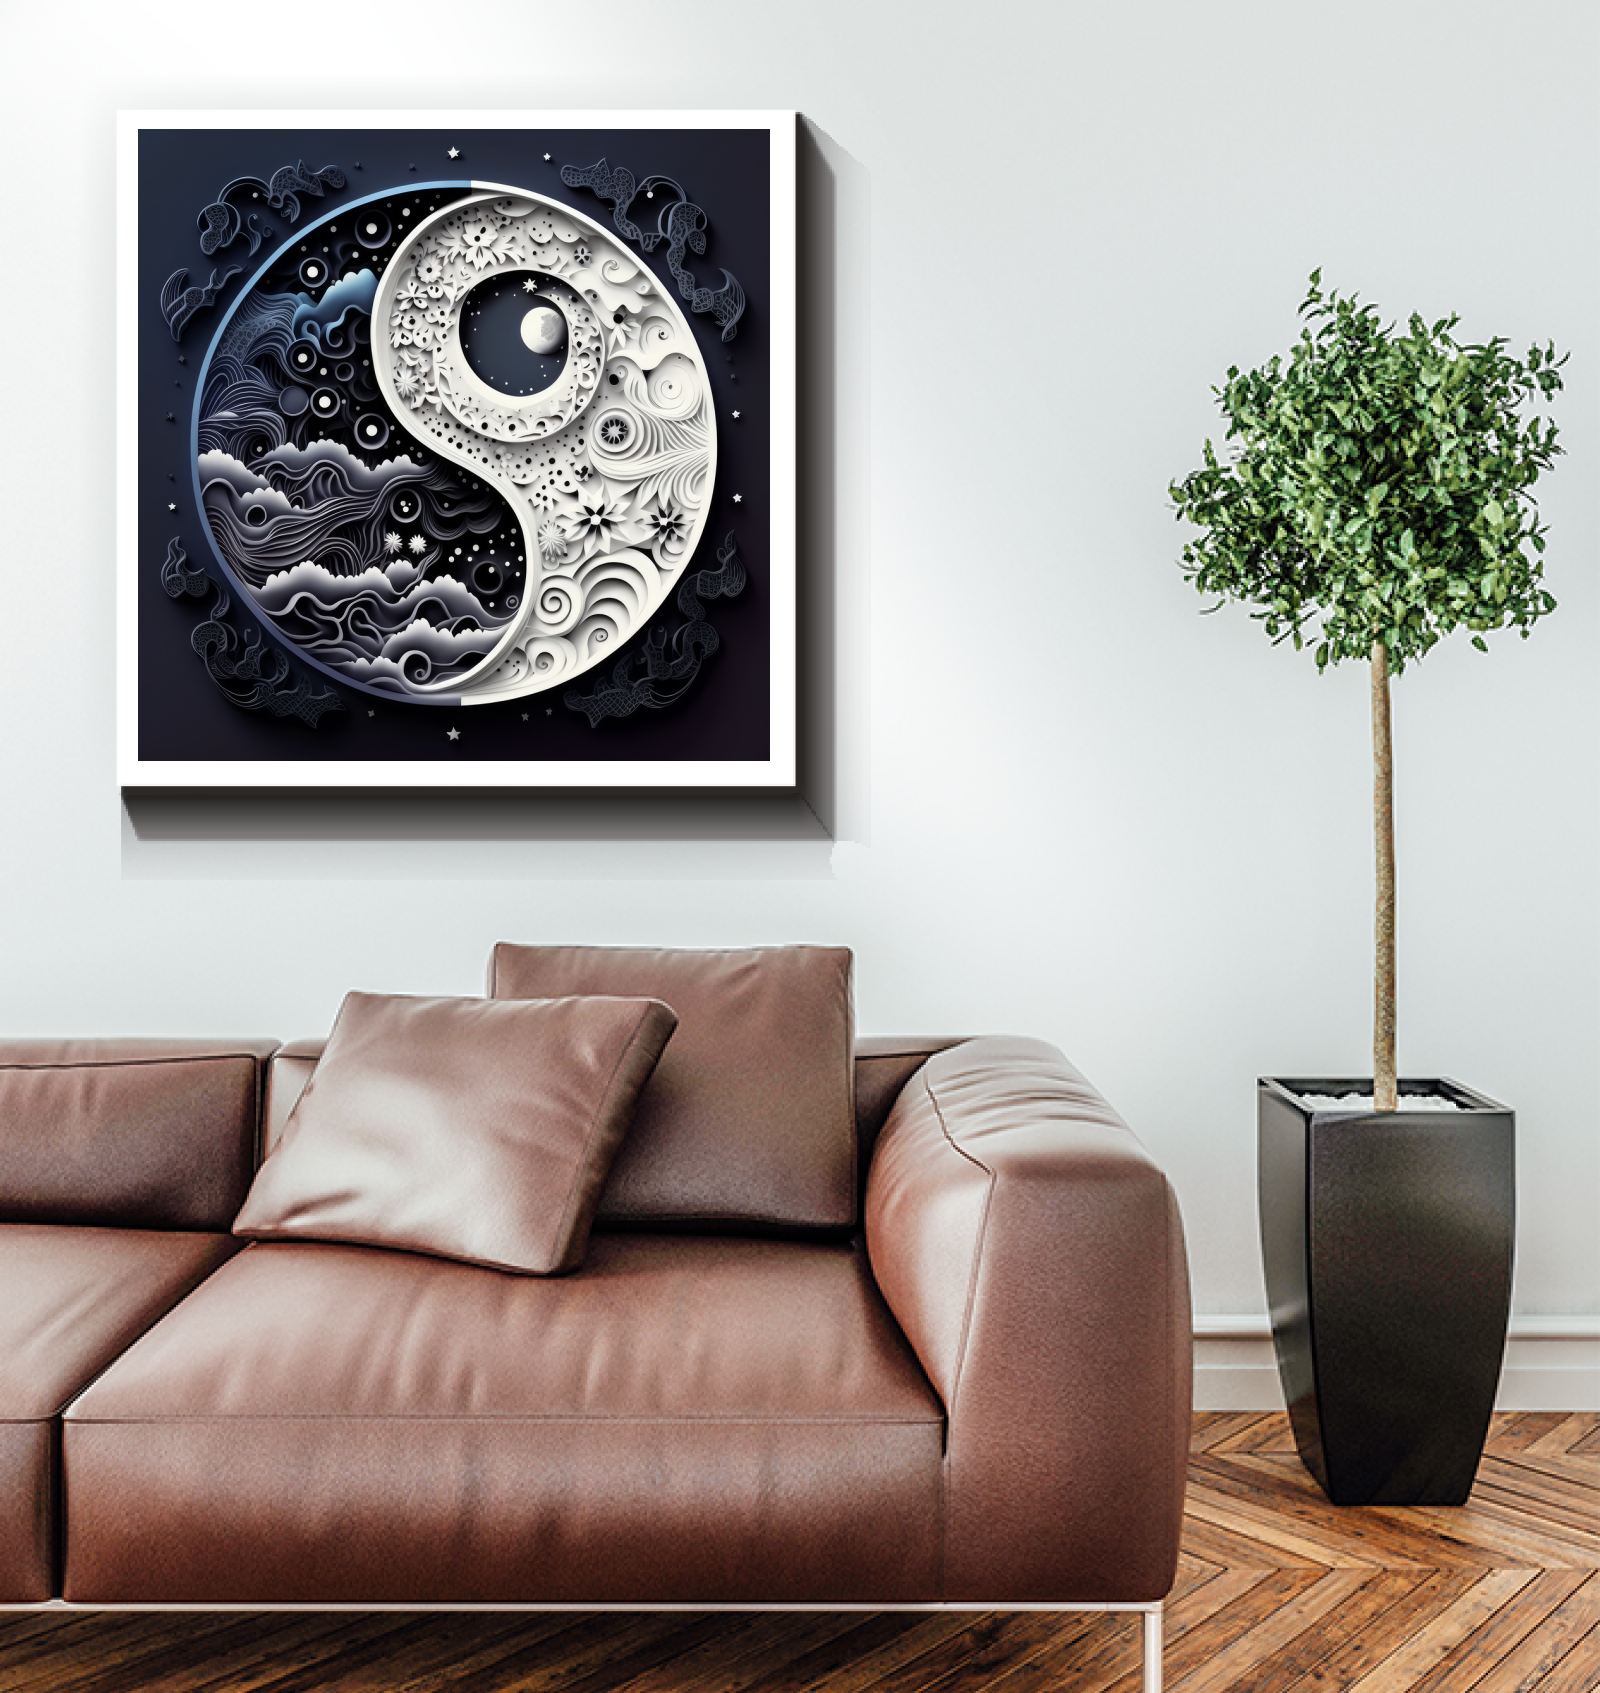 Starry Winter Solstice night depicted on canvas art.